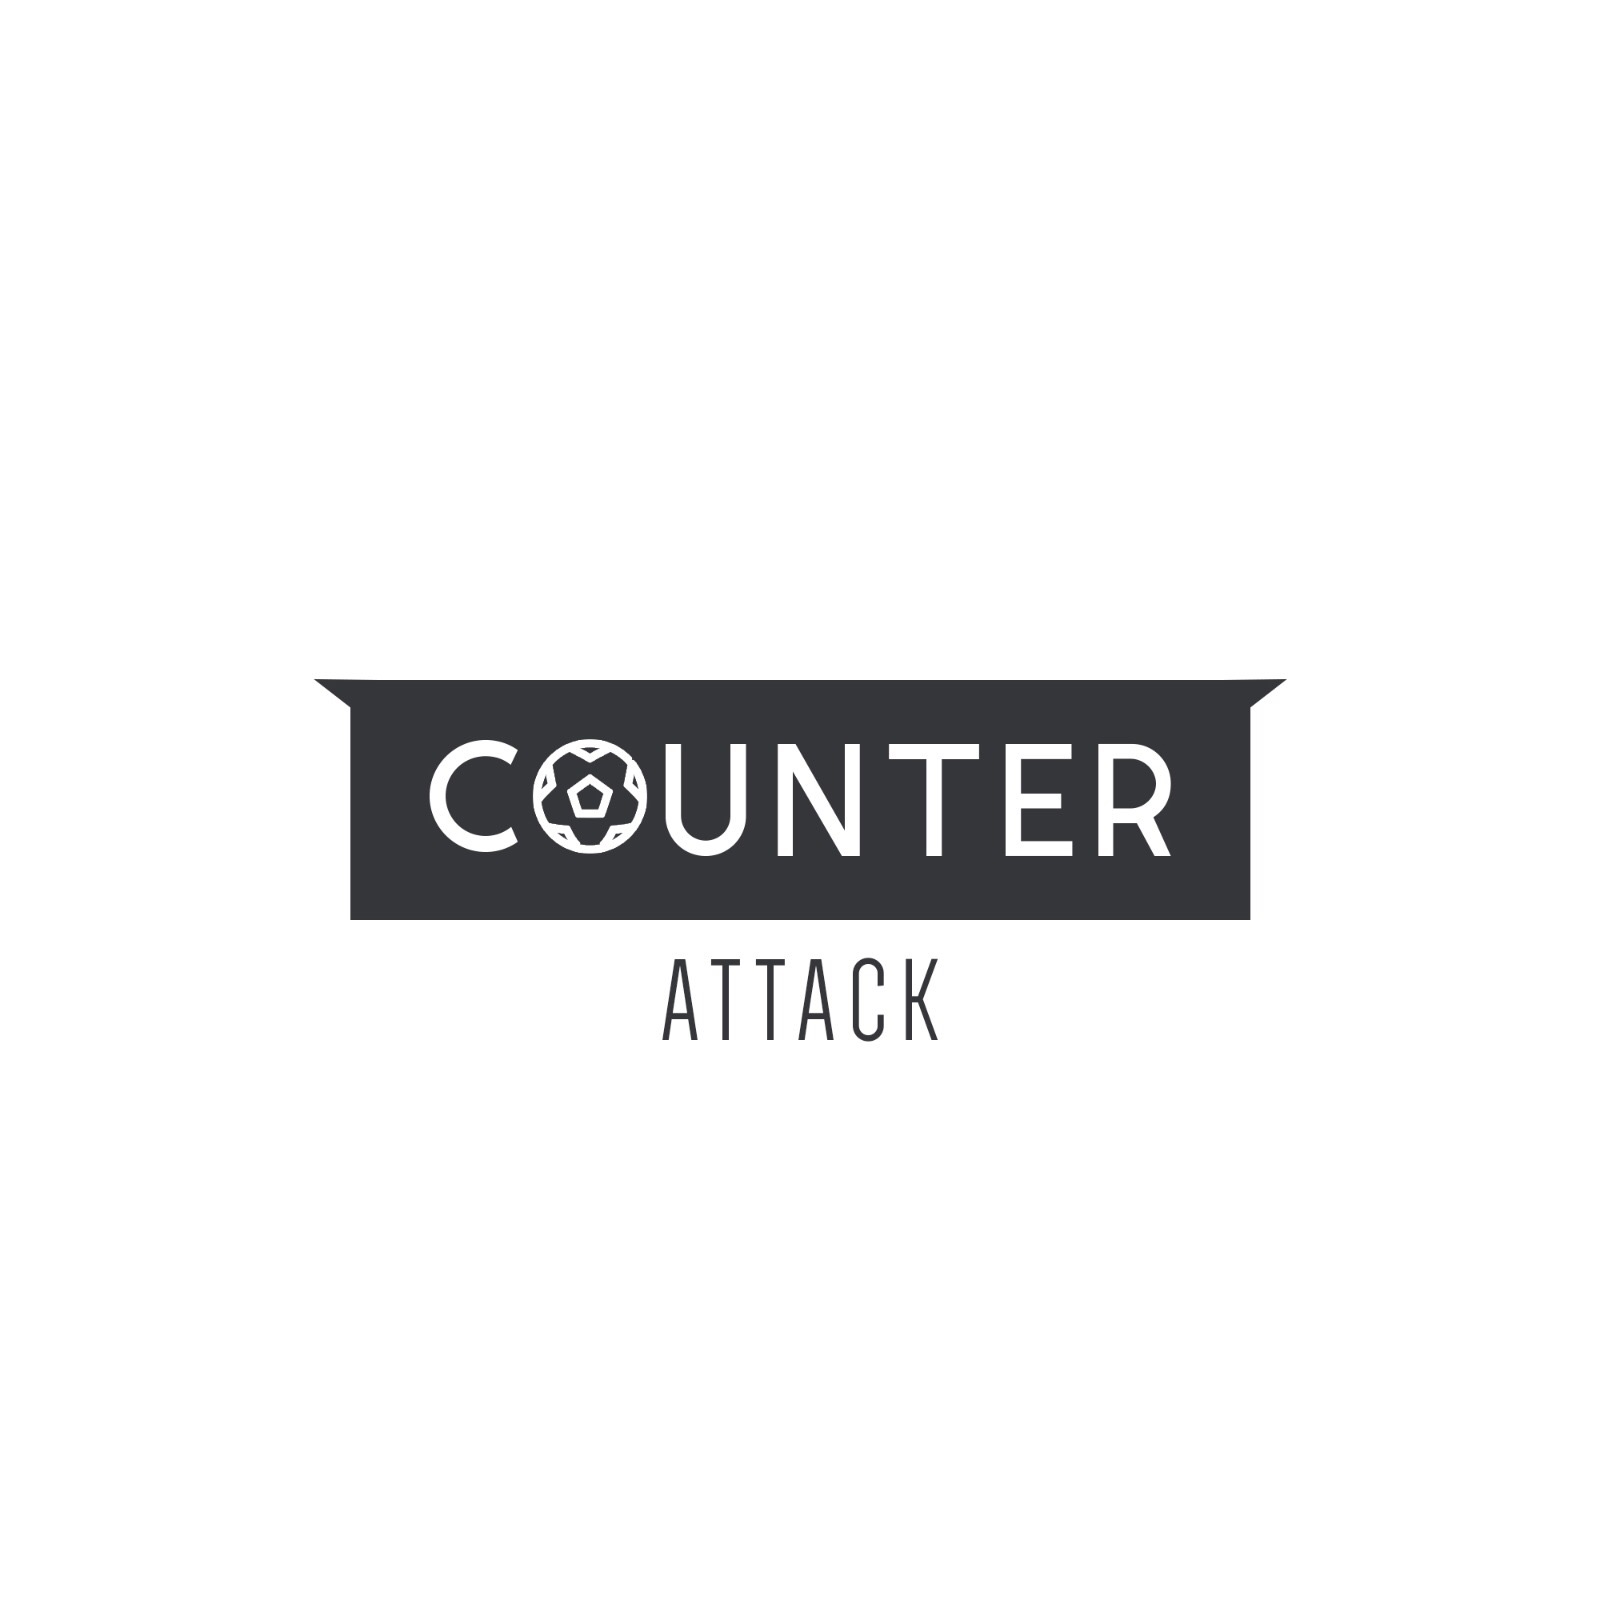 Counter Attack - Episode 53 - Do Chelsea Need That Overhaul Now?